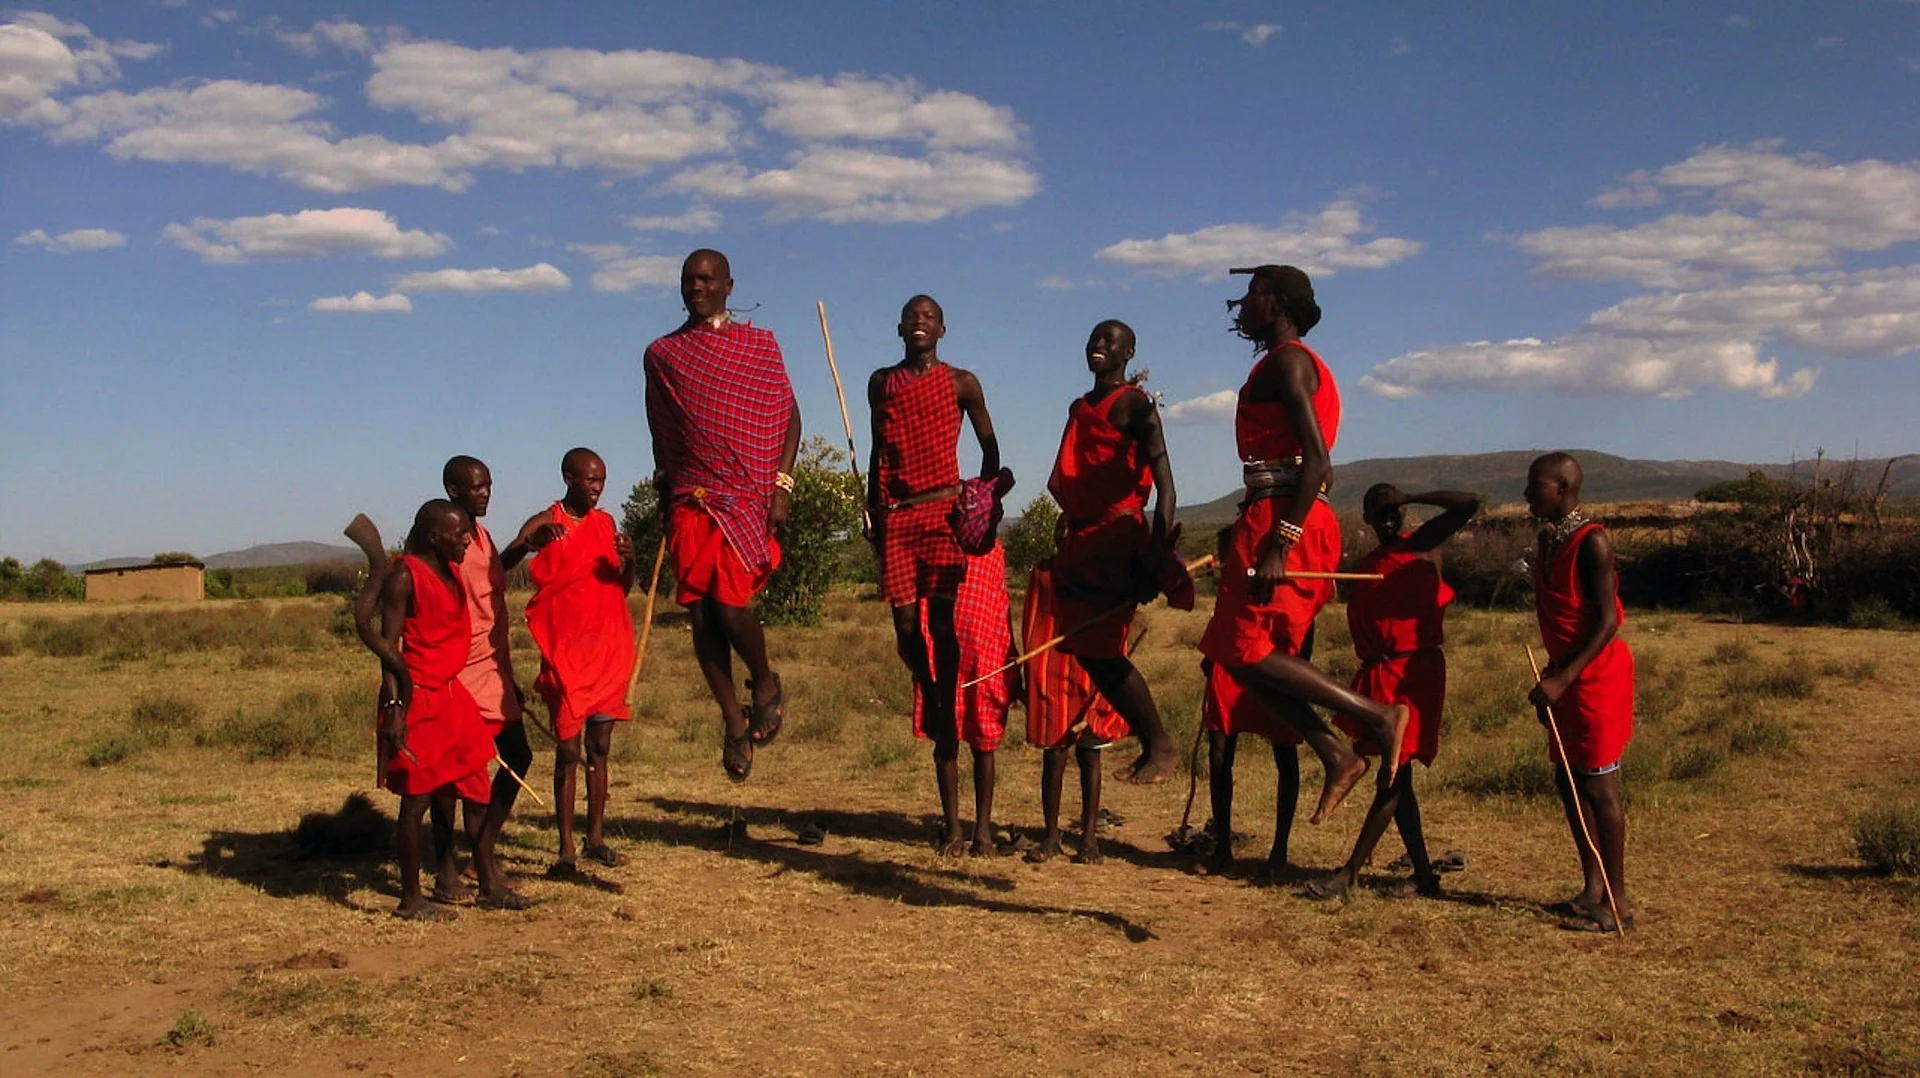 What vivid color do the prominent people in the Maasai tribe of